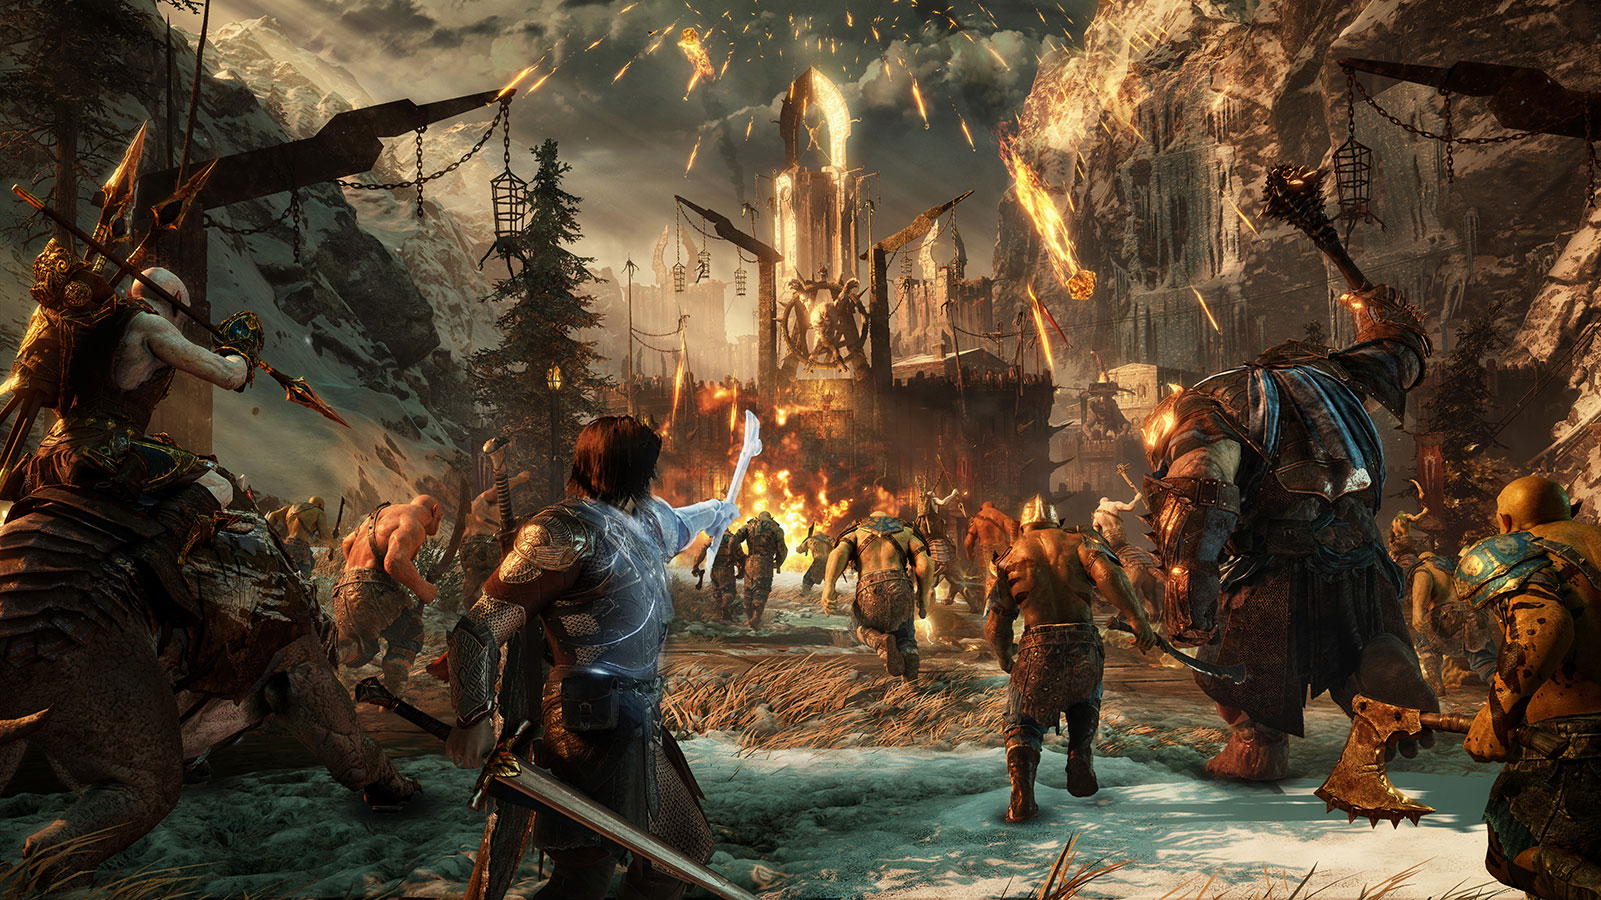 What You Need To Know About Shadow Of War’s Controversial Loot Boxes 